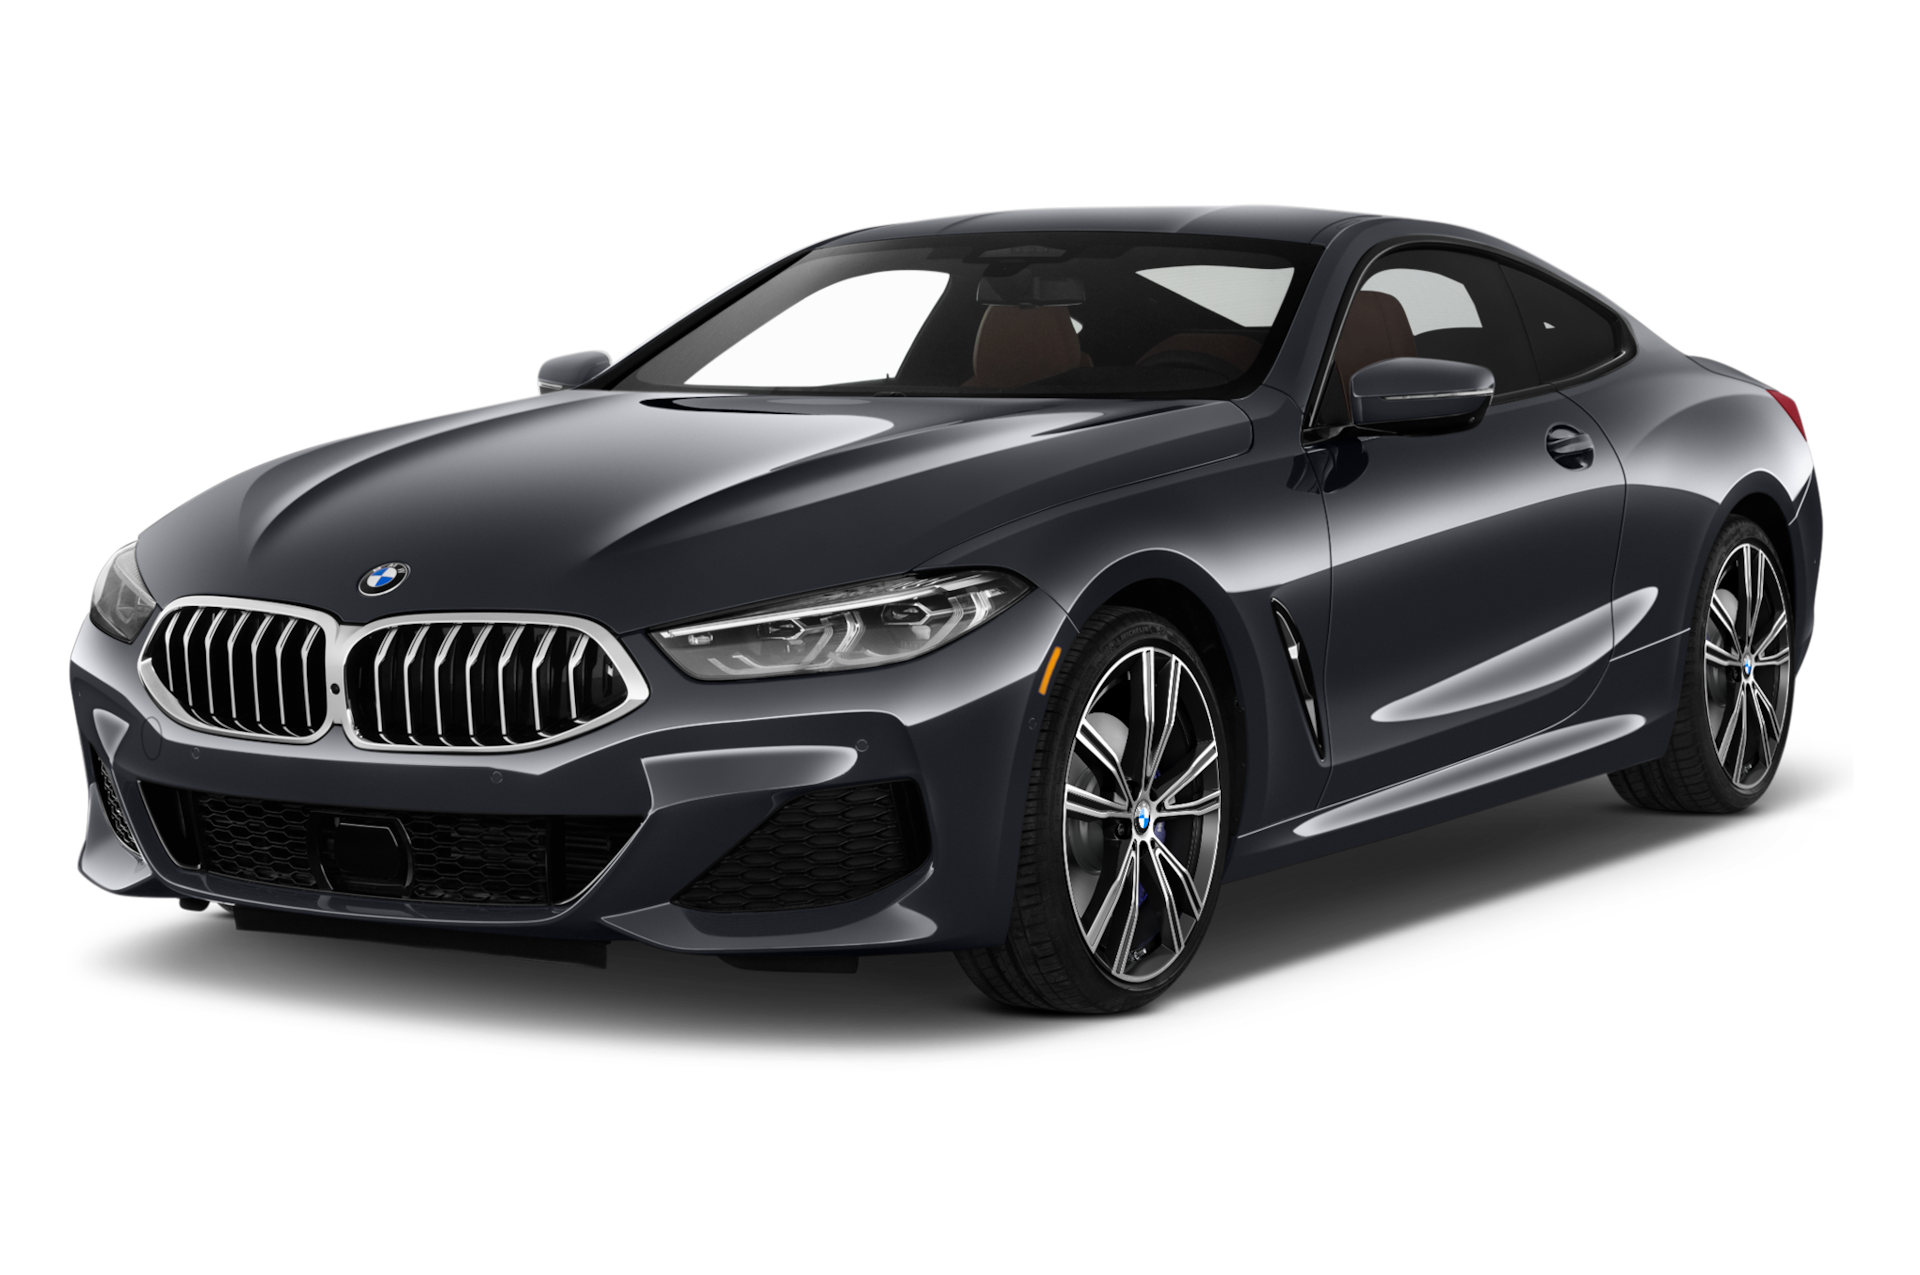 2019 BMW 8-Series Prices, Reviews, and Photos - MotorTrend